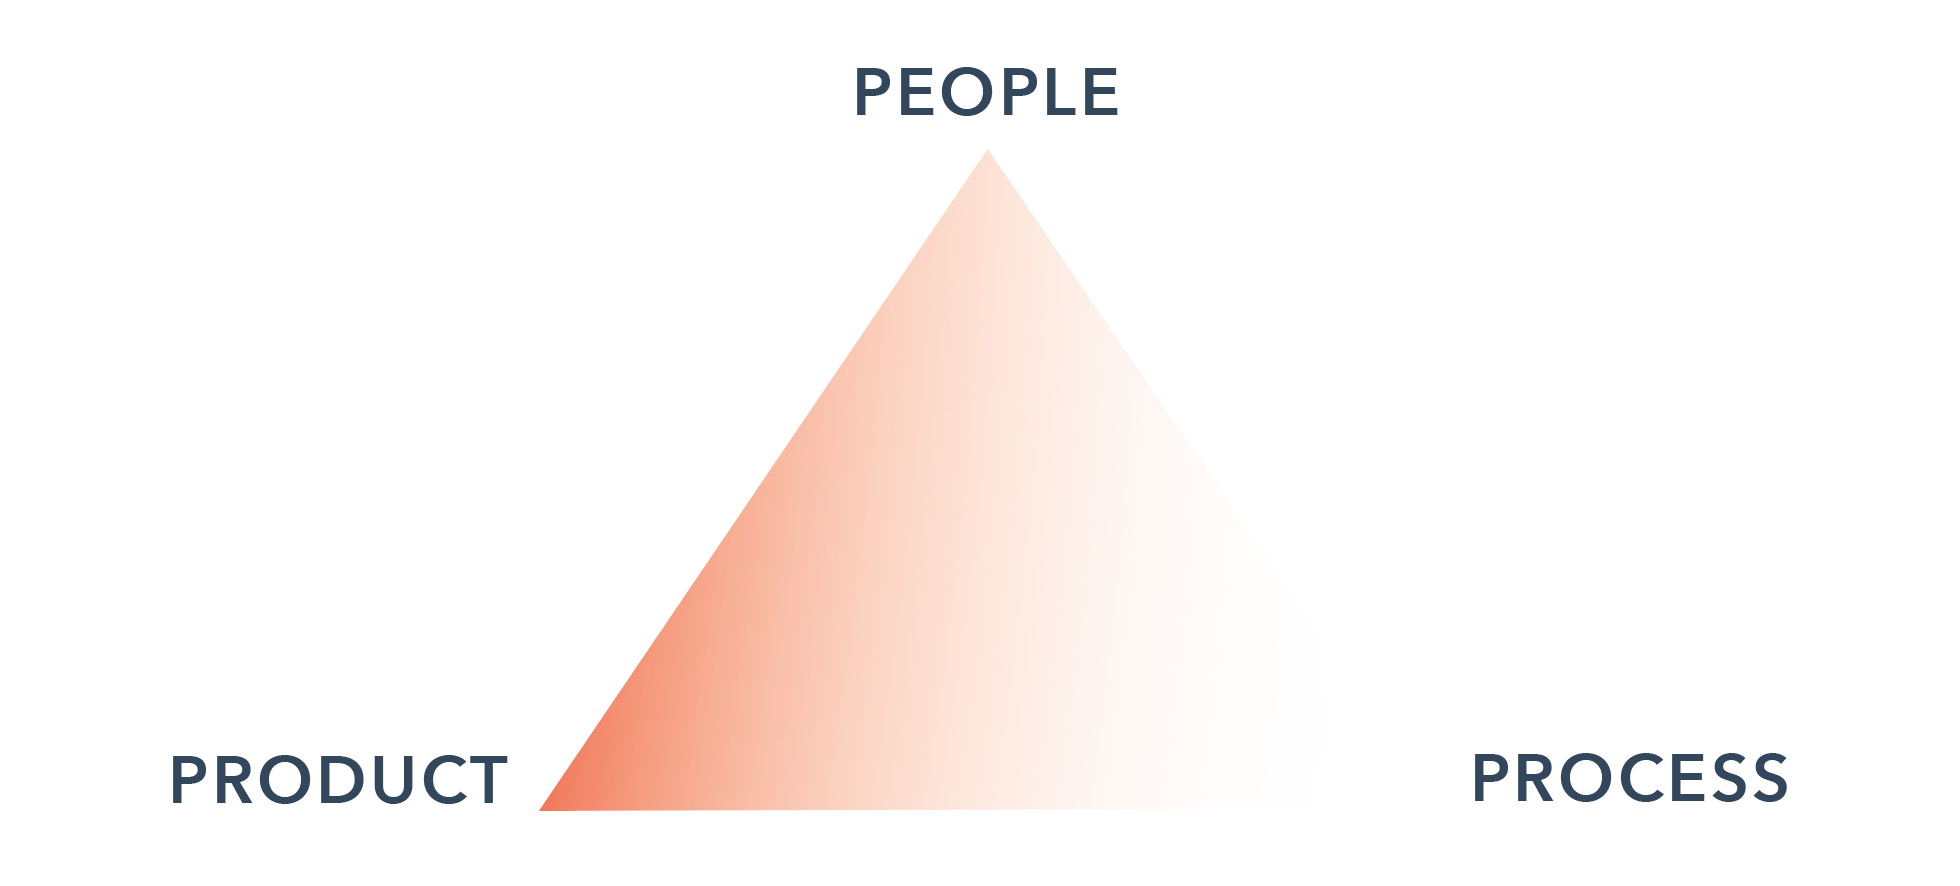 The final triangle. "People" at the top, "Product" at the bottom left, "Process" at the bottom right. Except this time, the shading inside highlights the connection between "People" and "Product."